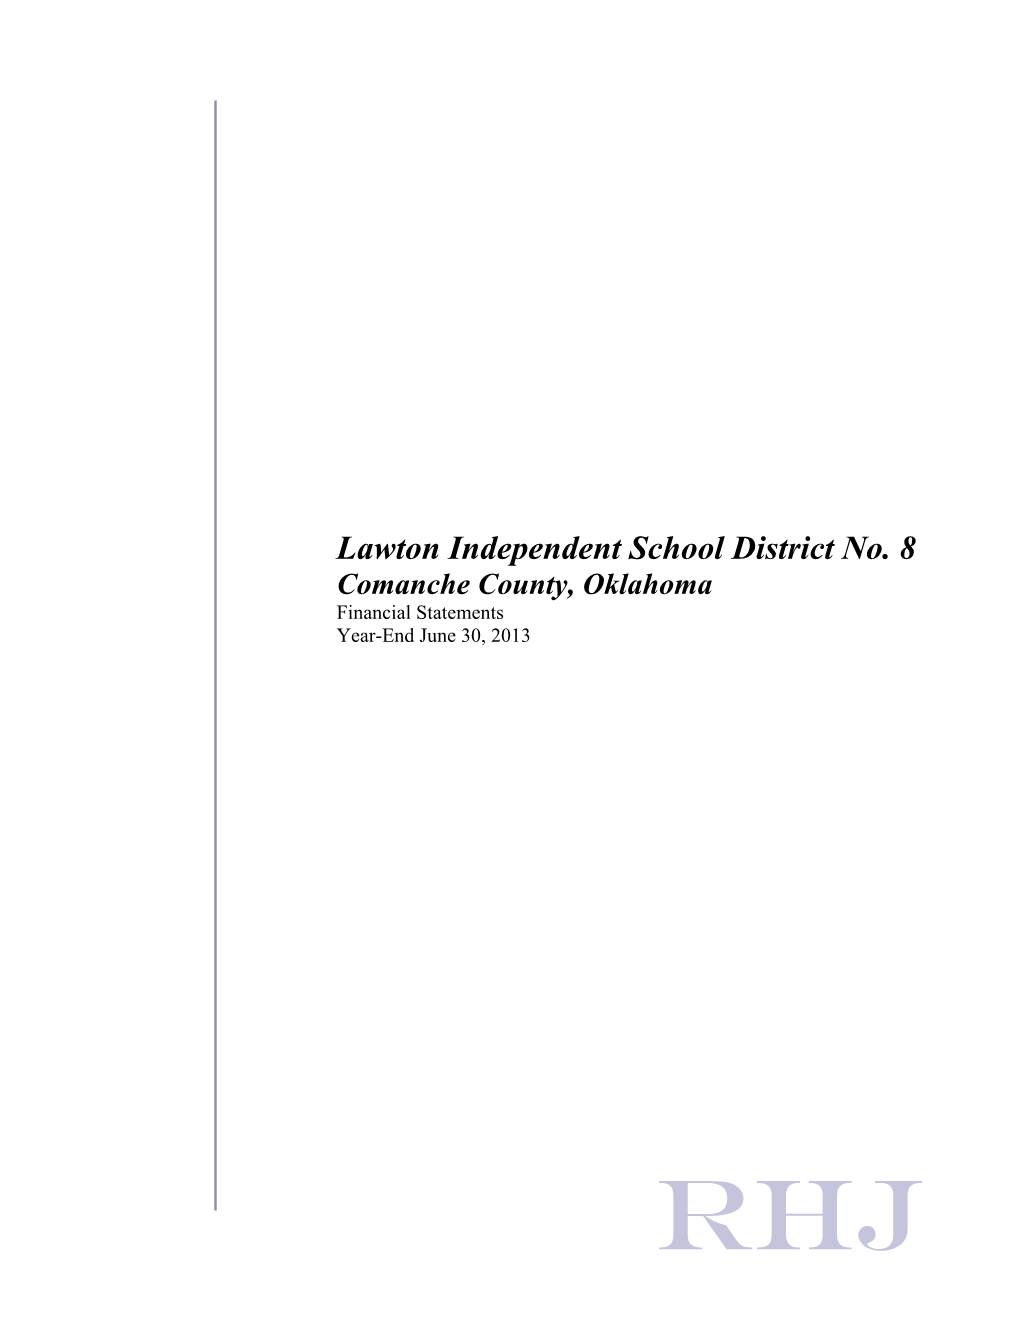 Lawton Independent School District No. 8 Comanche County, Oklahoma Financial Statements Year-End June 30, 2013